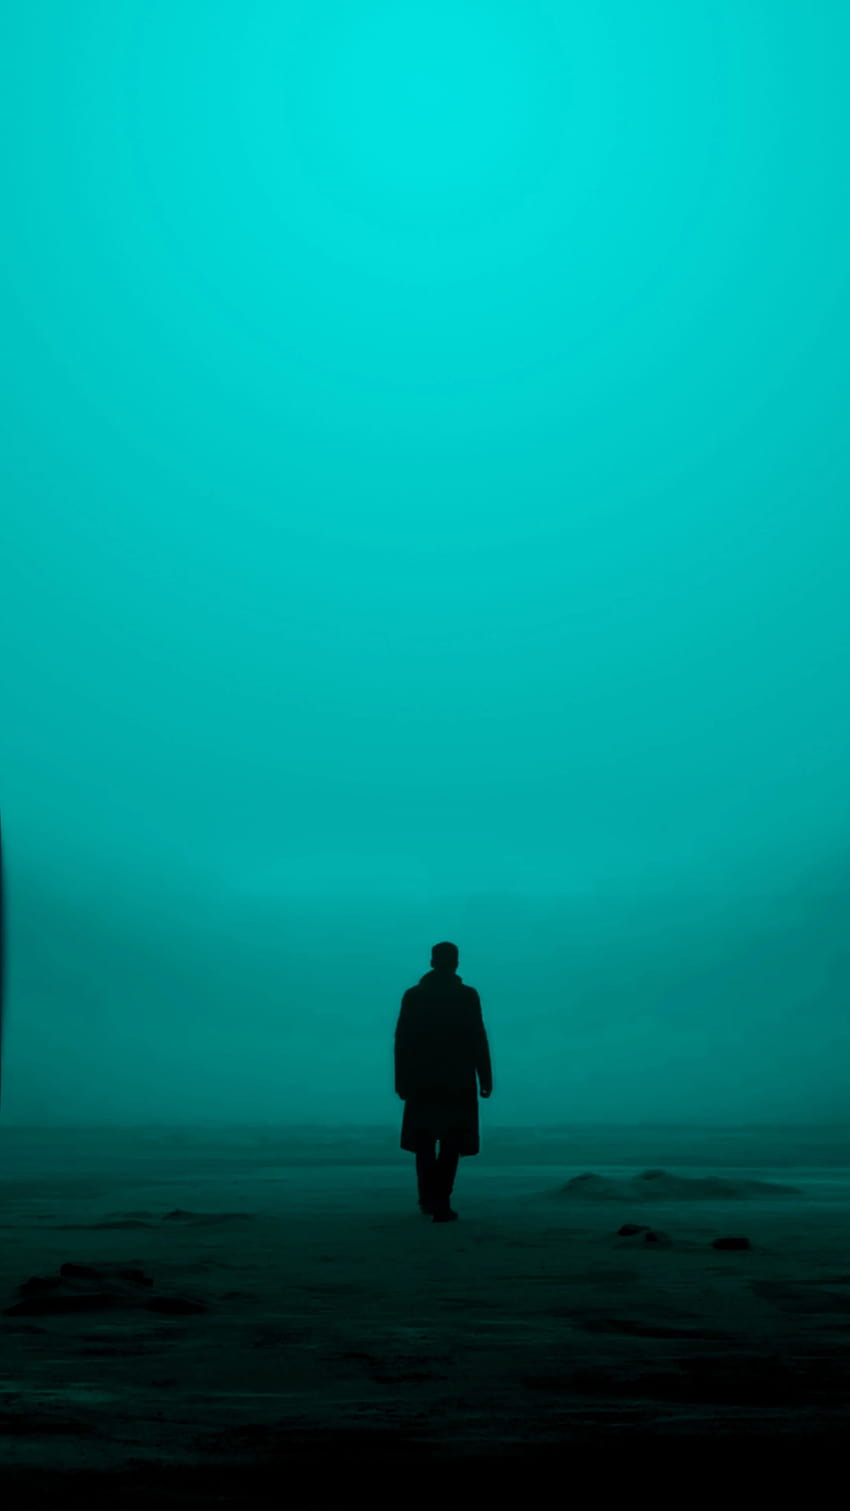 Blade Runner 2049 for Your iPhone and iPad, blade runner android HD phone wallpaper